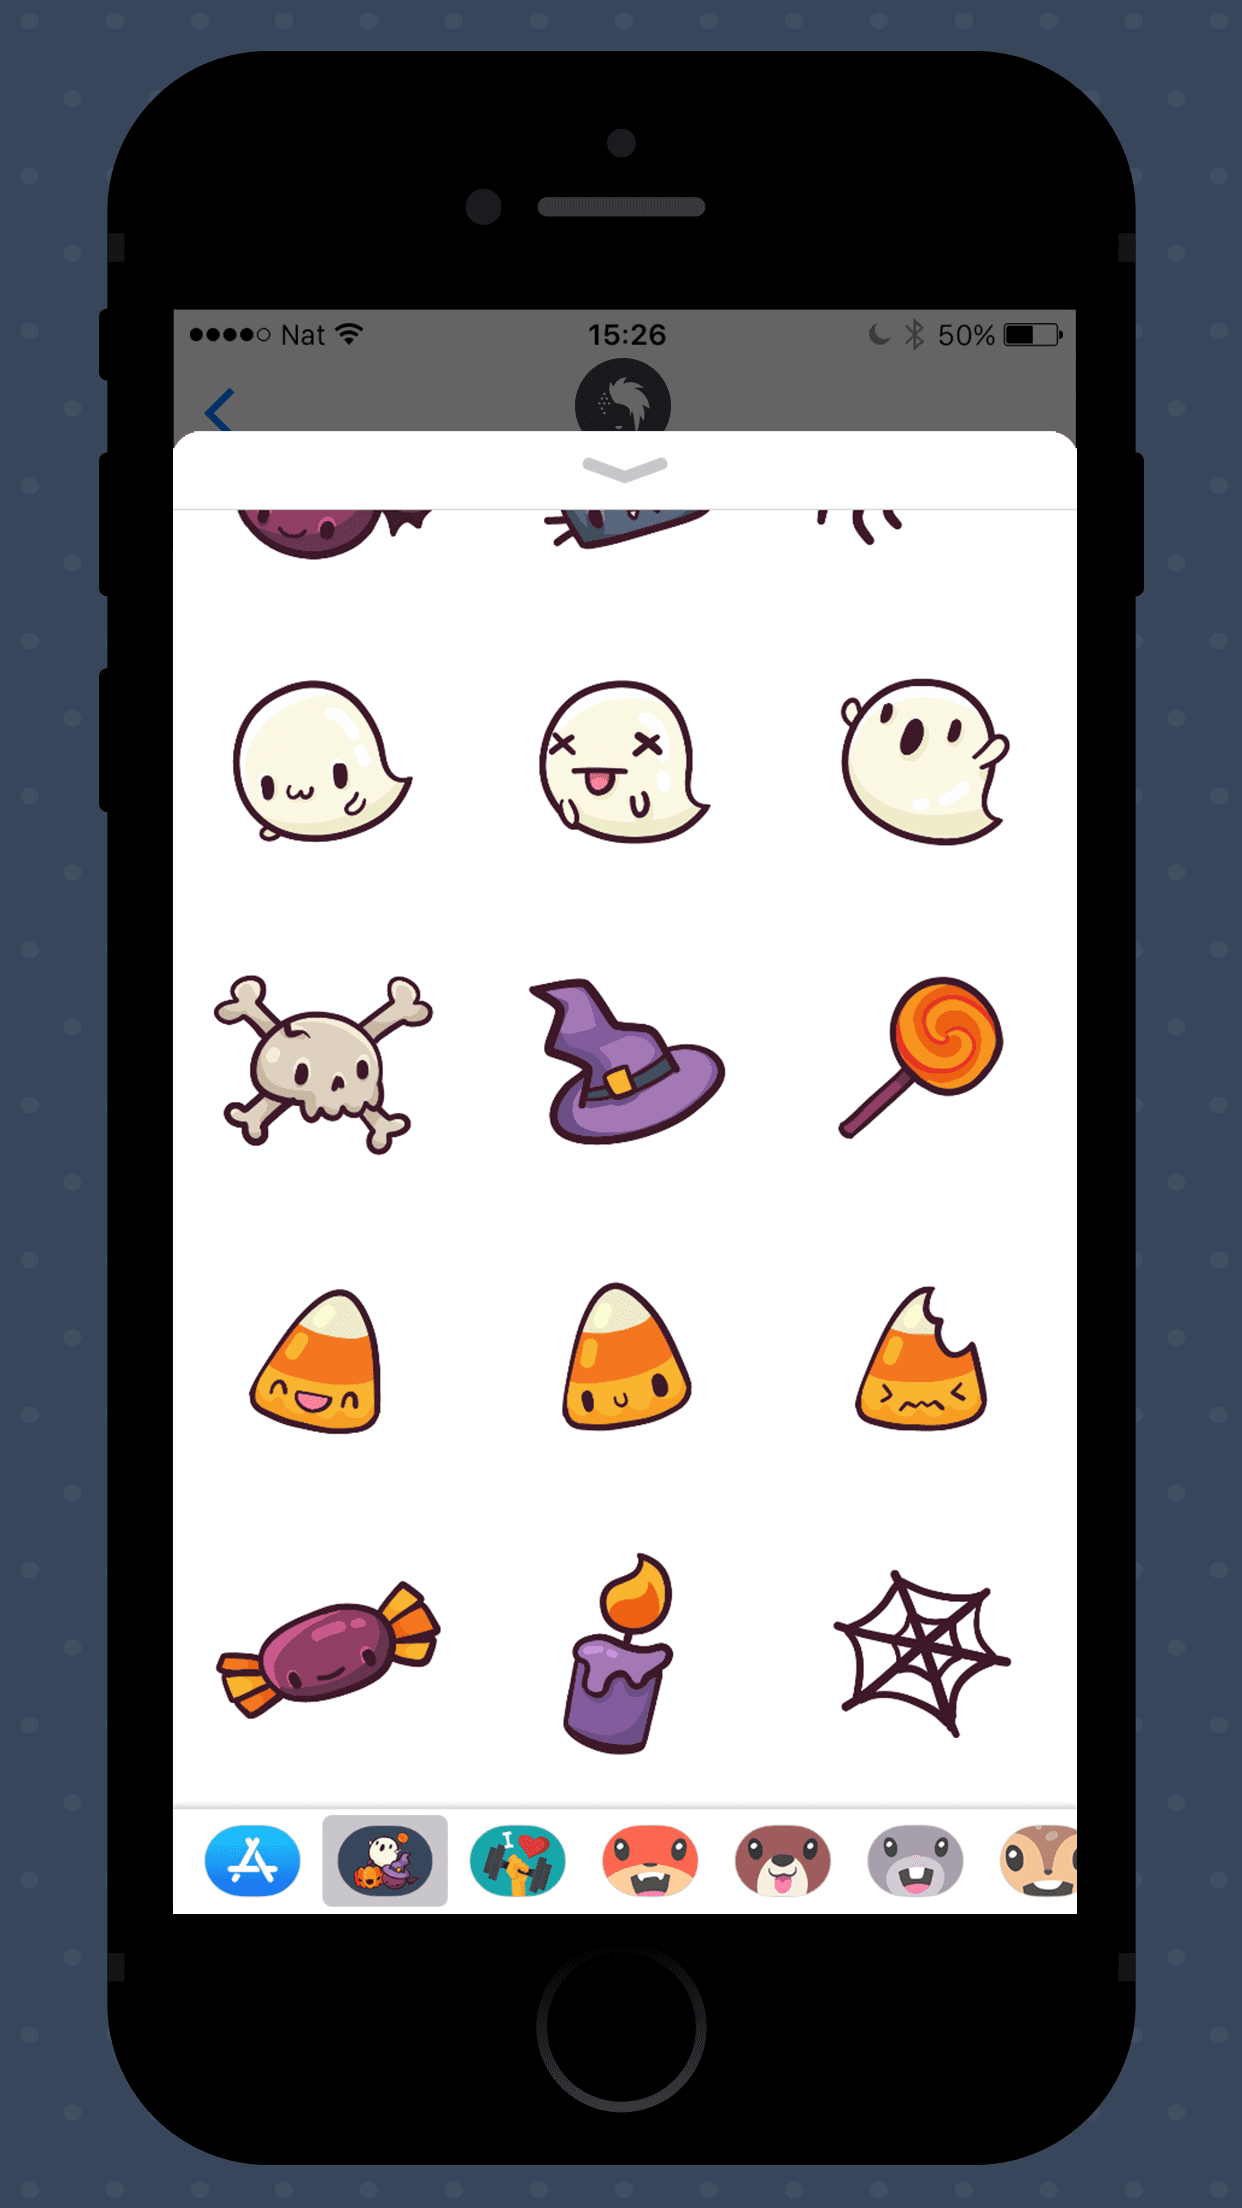 Halloween icons iMessage stickers